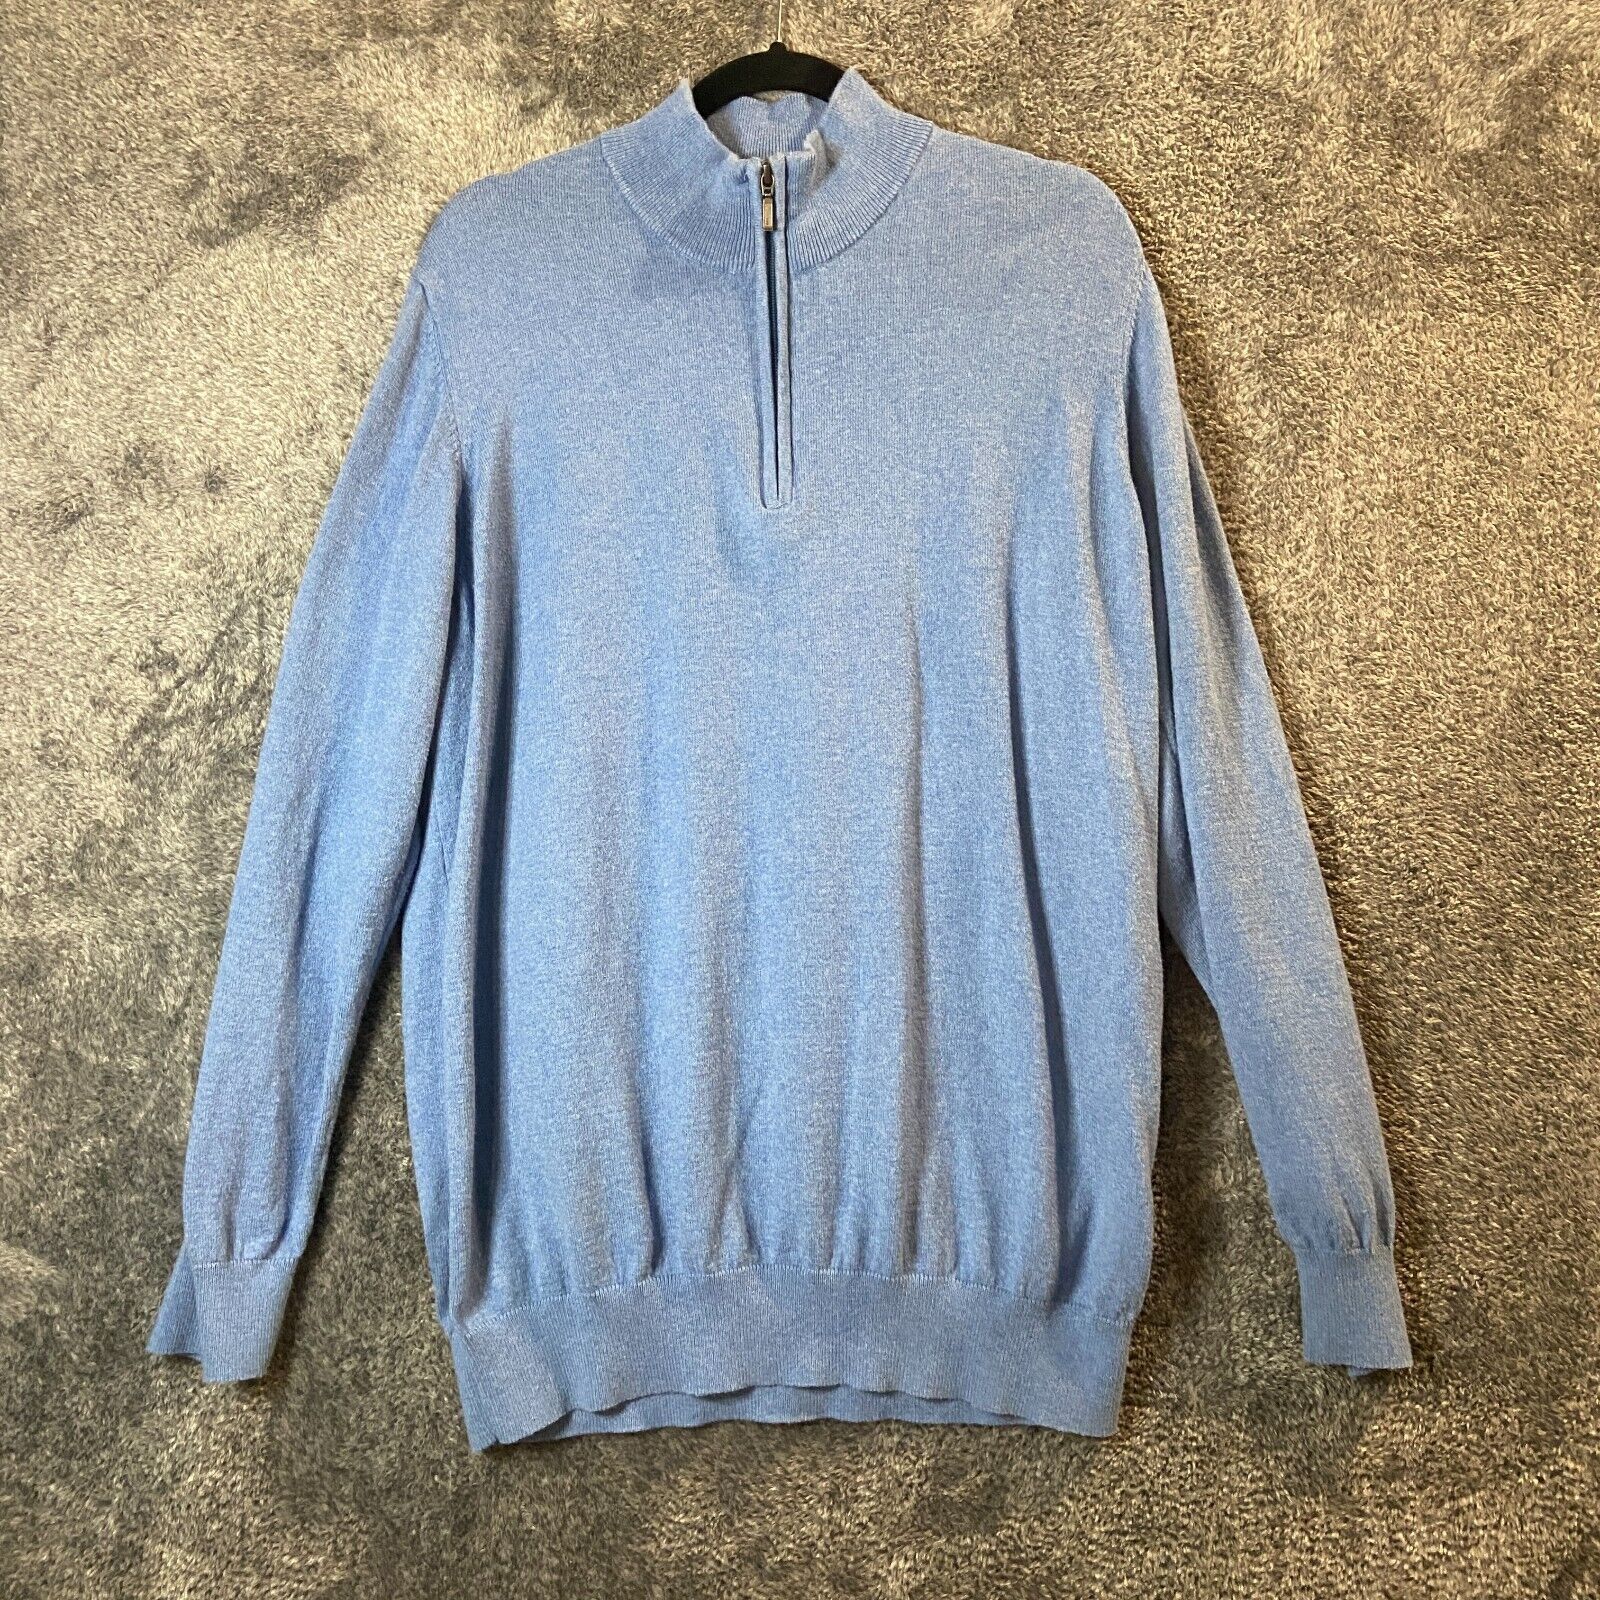 Primary image for LL Bean 1/4 Zip Sweater Mens XL Tall Blue Cashmere Blend Pullover Grandpa